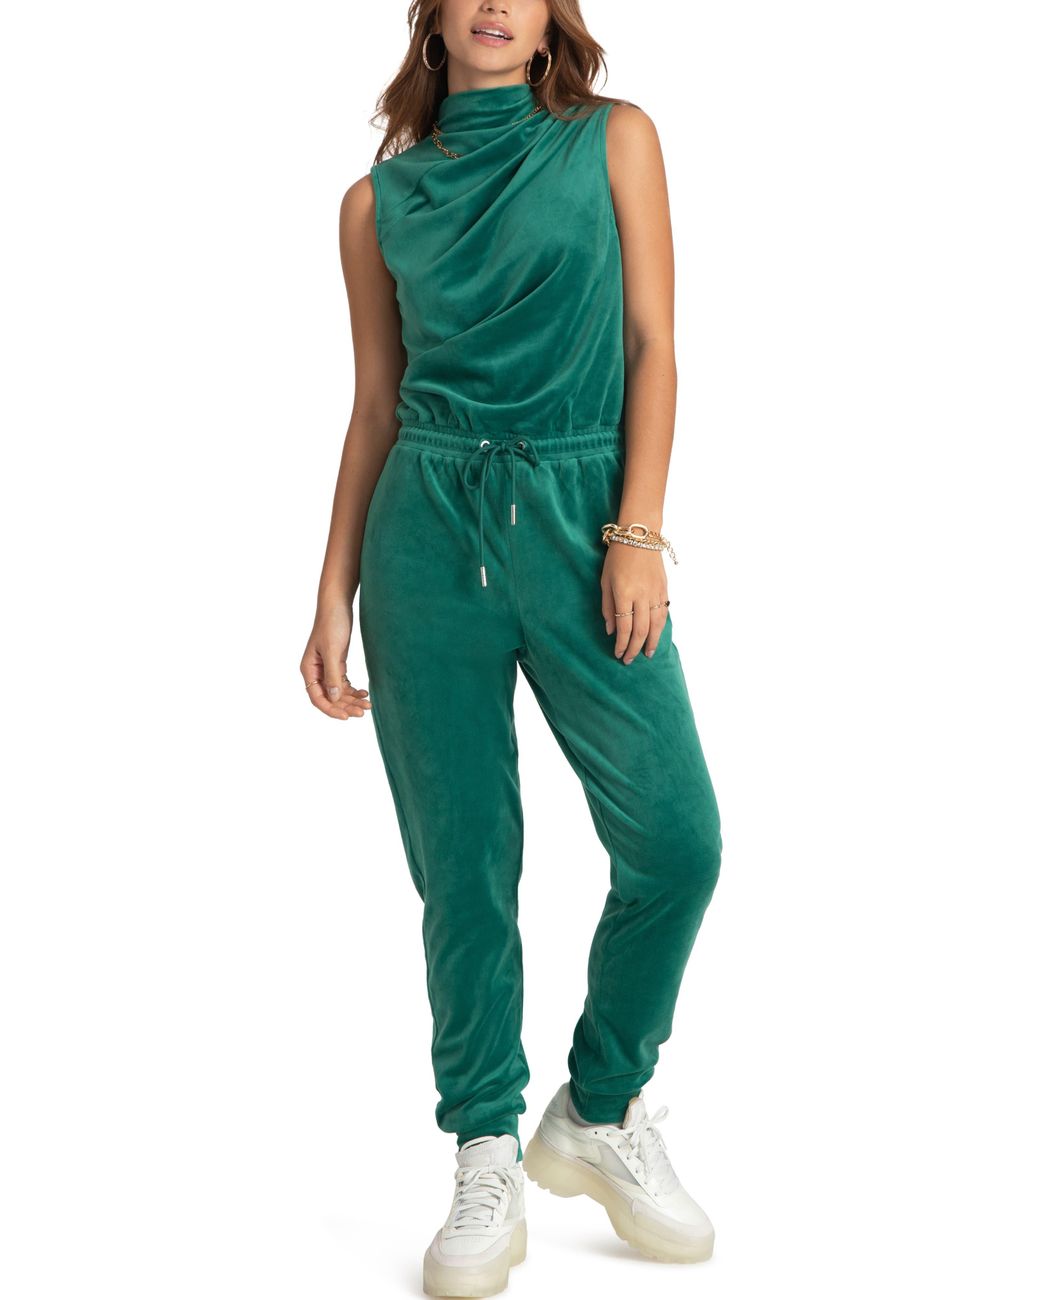 Juicy Couture Sleeveless Velour Jumpsuit In Jade Green At Nordstrom ...